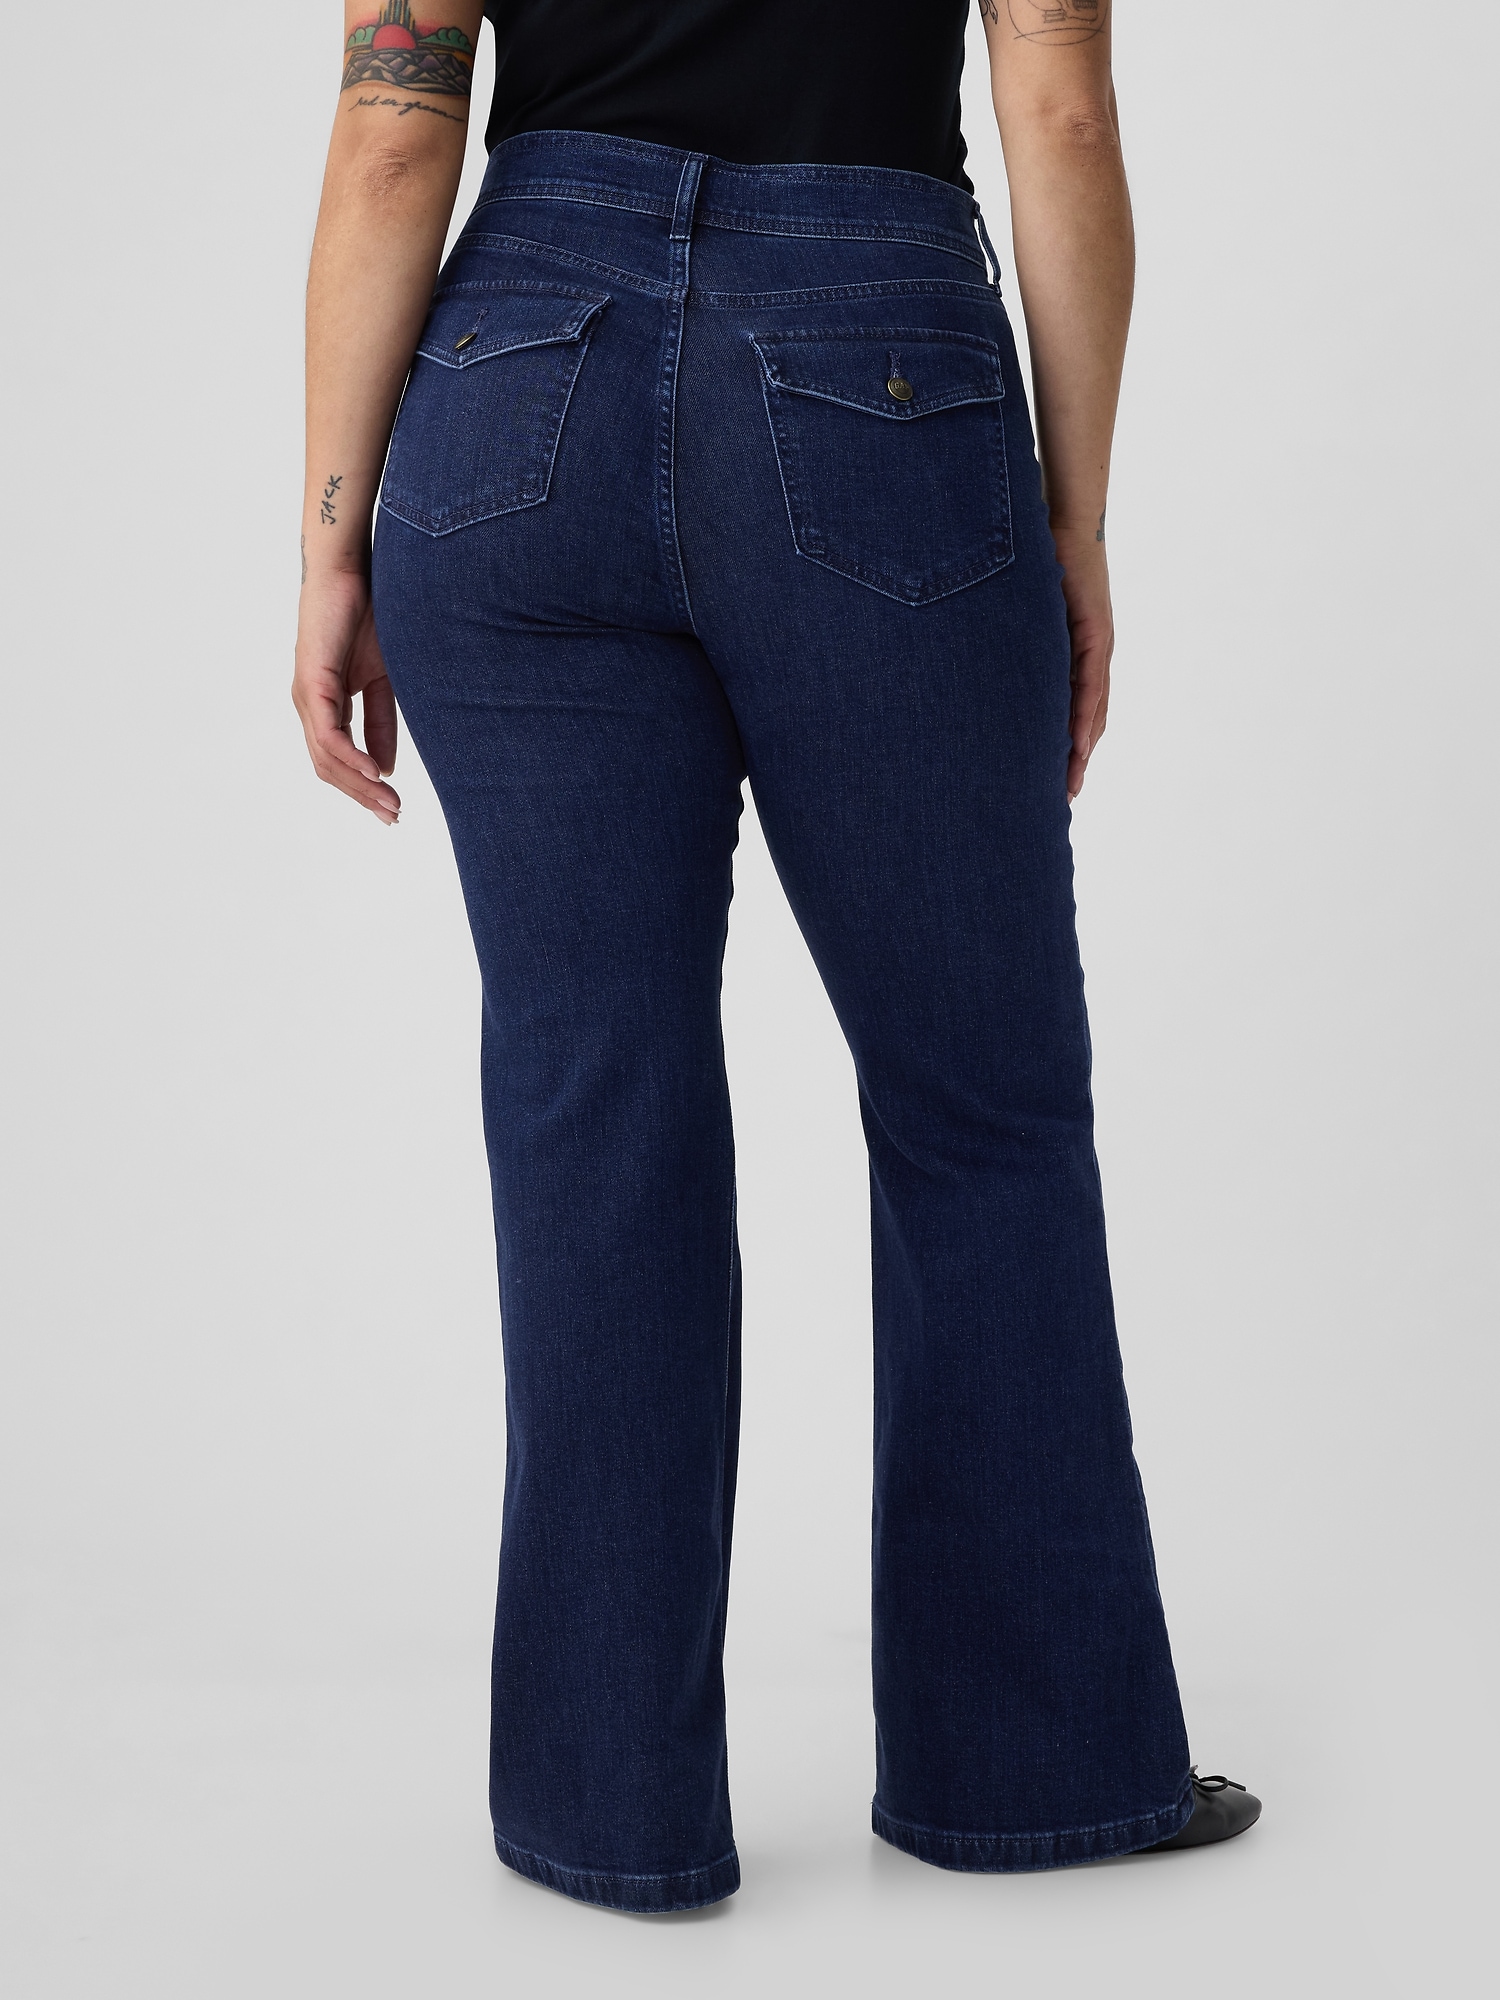 Every Day Mid Rise Flare Jeans (Regular, Petite, & Plus